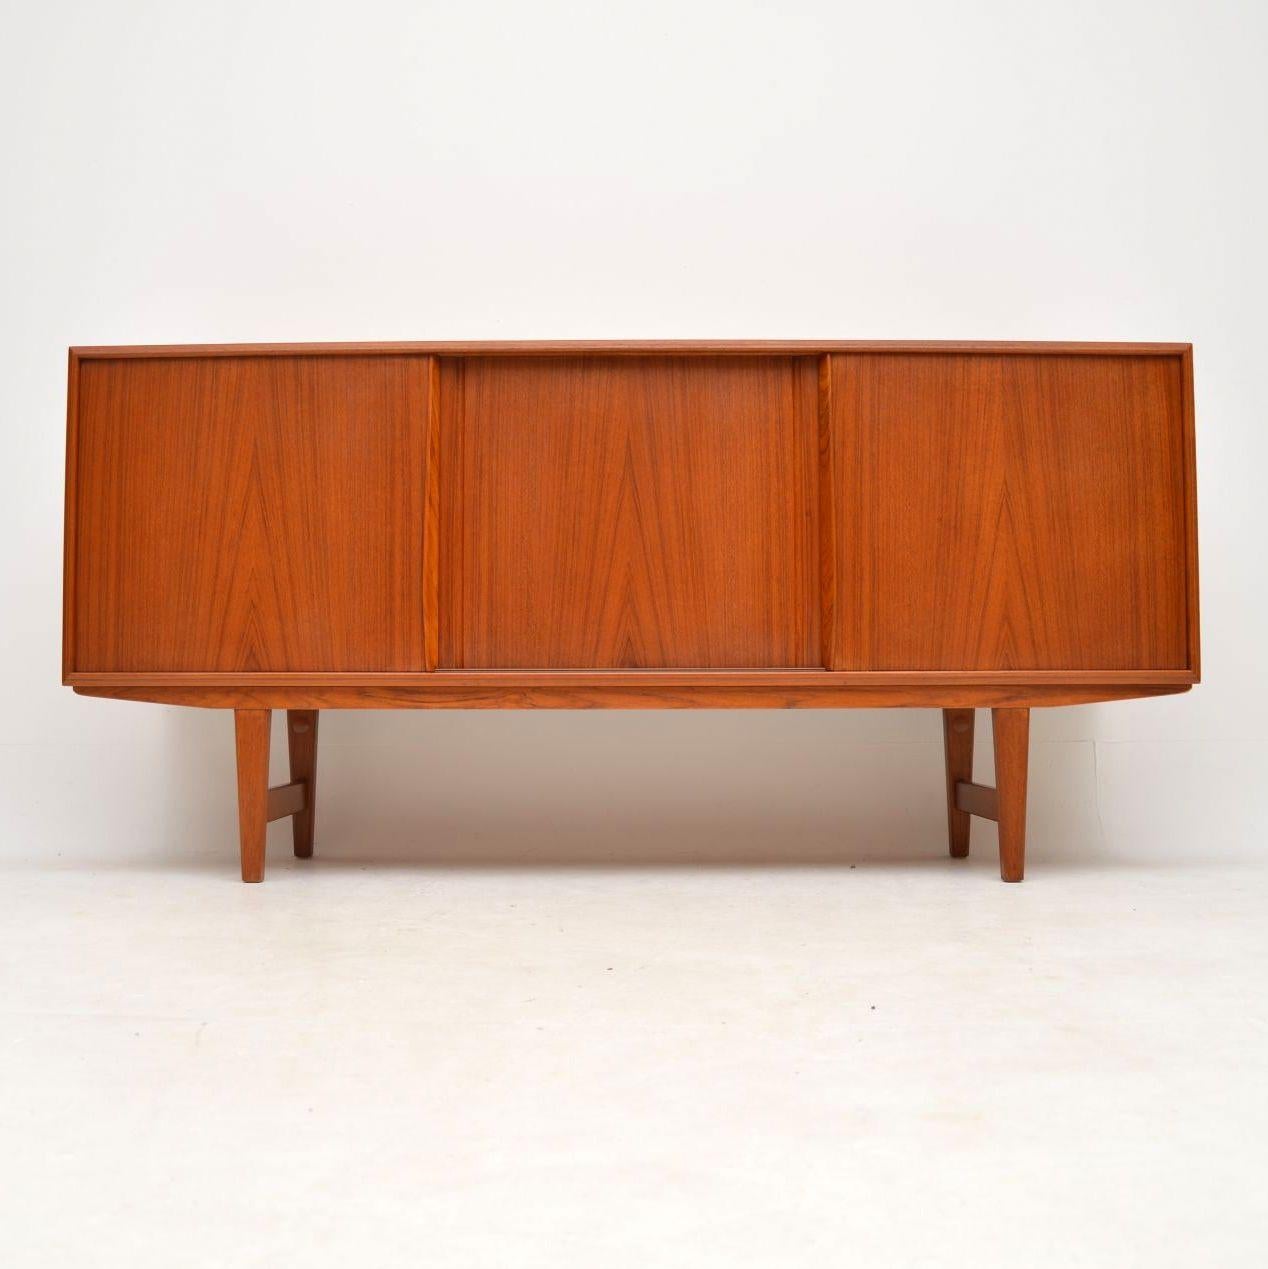 A superb vintage Danish sideboard in teak, this was made by Skovby and it dates from the 1960s. It’s of very good quality and is of great proportions. We have had this fully stripped and re-polished to a very high standard, the condition is superb